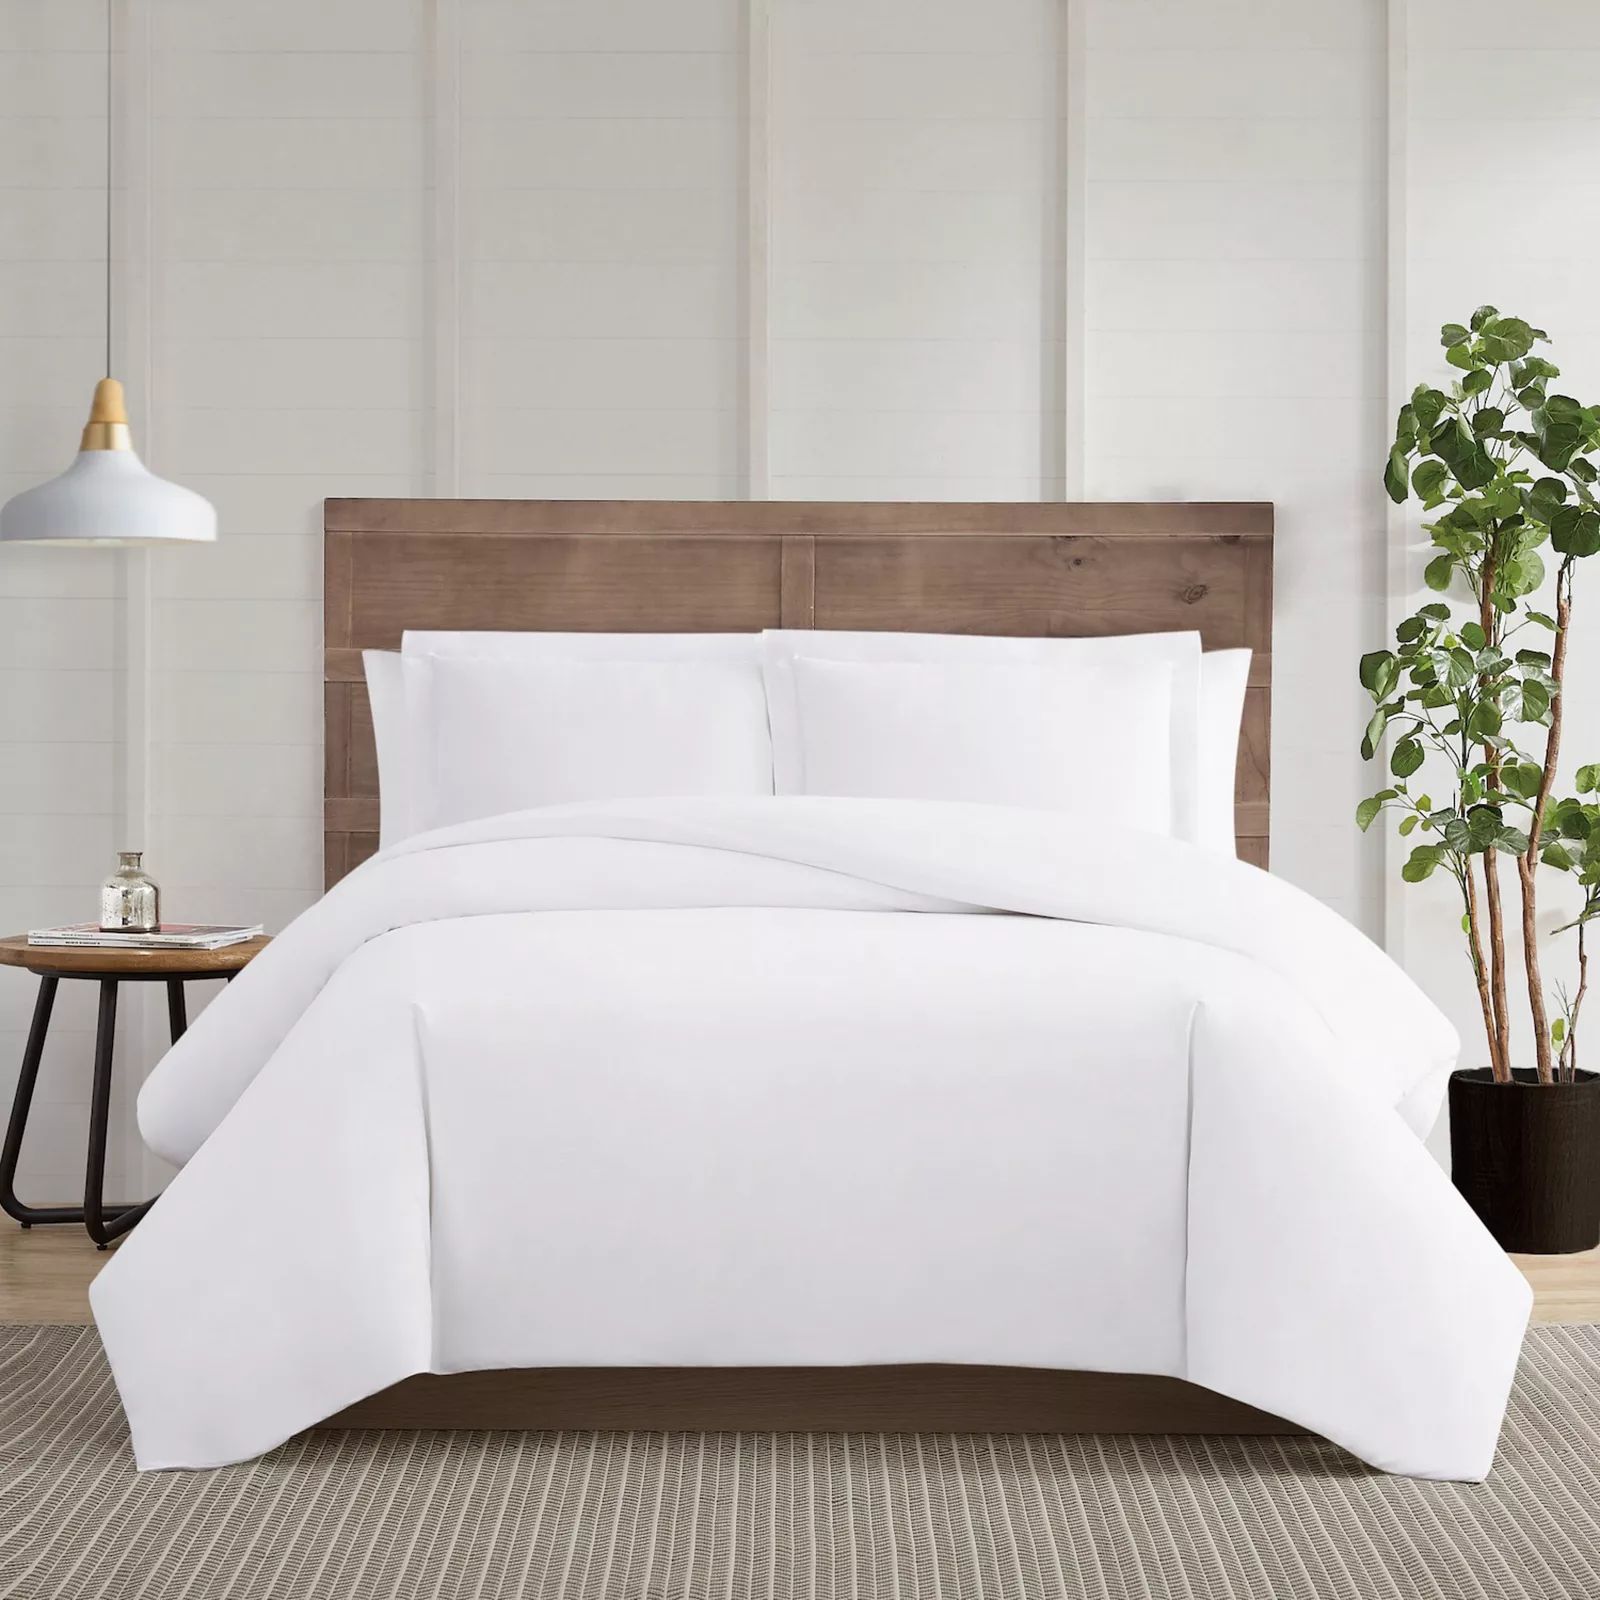 Truly Calm Silver Cool White Duvet Cover Set with Shams, Twin XL | Kohl's